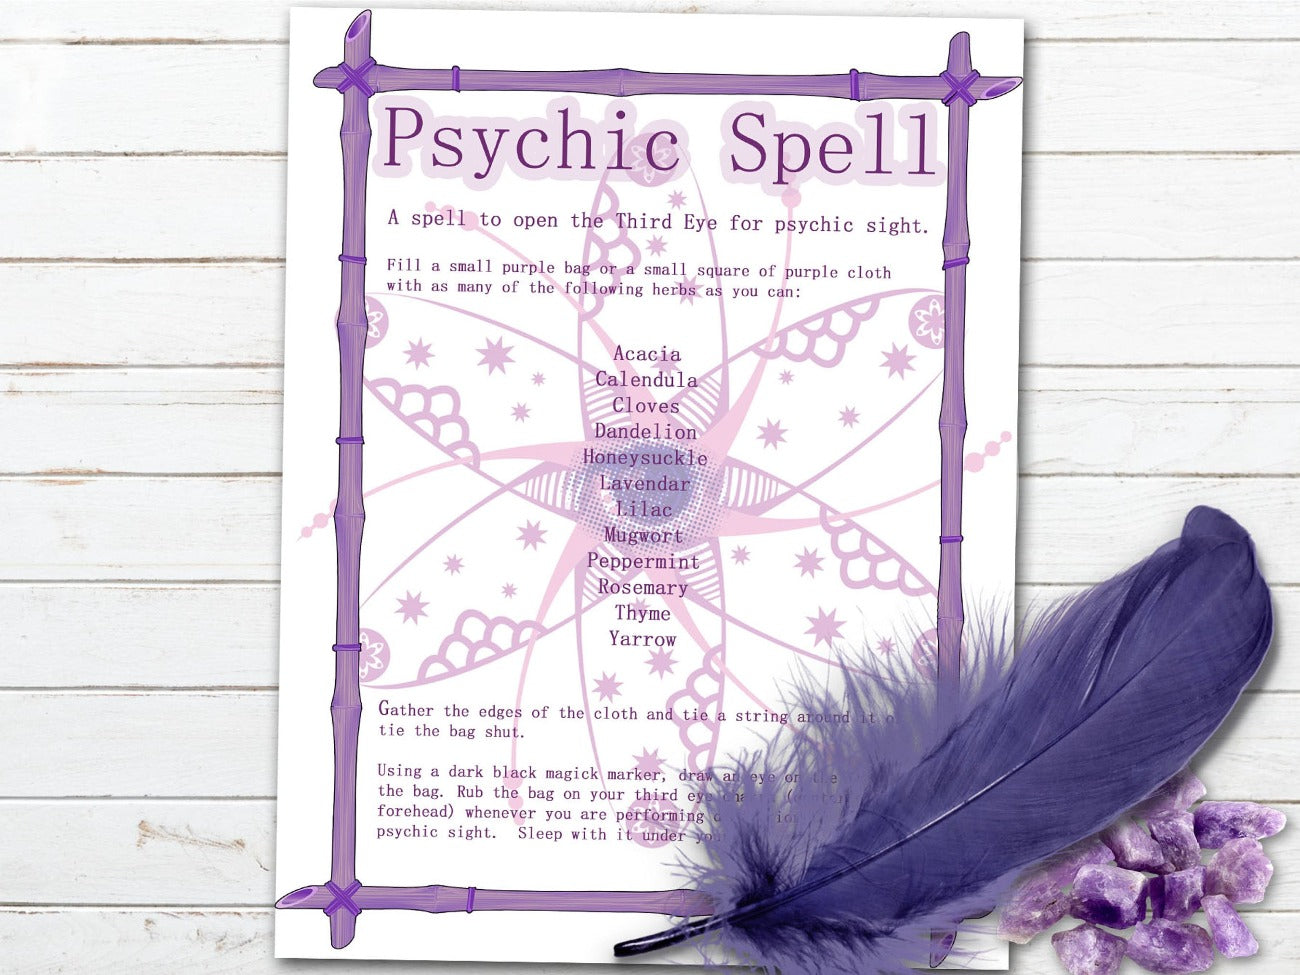 PSYCHIC SPELL, How To Open your Third Eye, Wicca Clairvoyant Magic, Telepathy Charm Bag Spell, Wicca Witchcraft Subconscious Mind Opening - Morgana Magick Spell